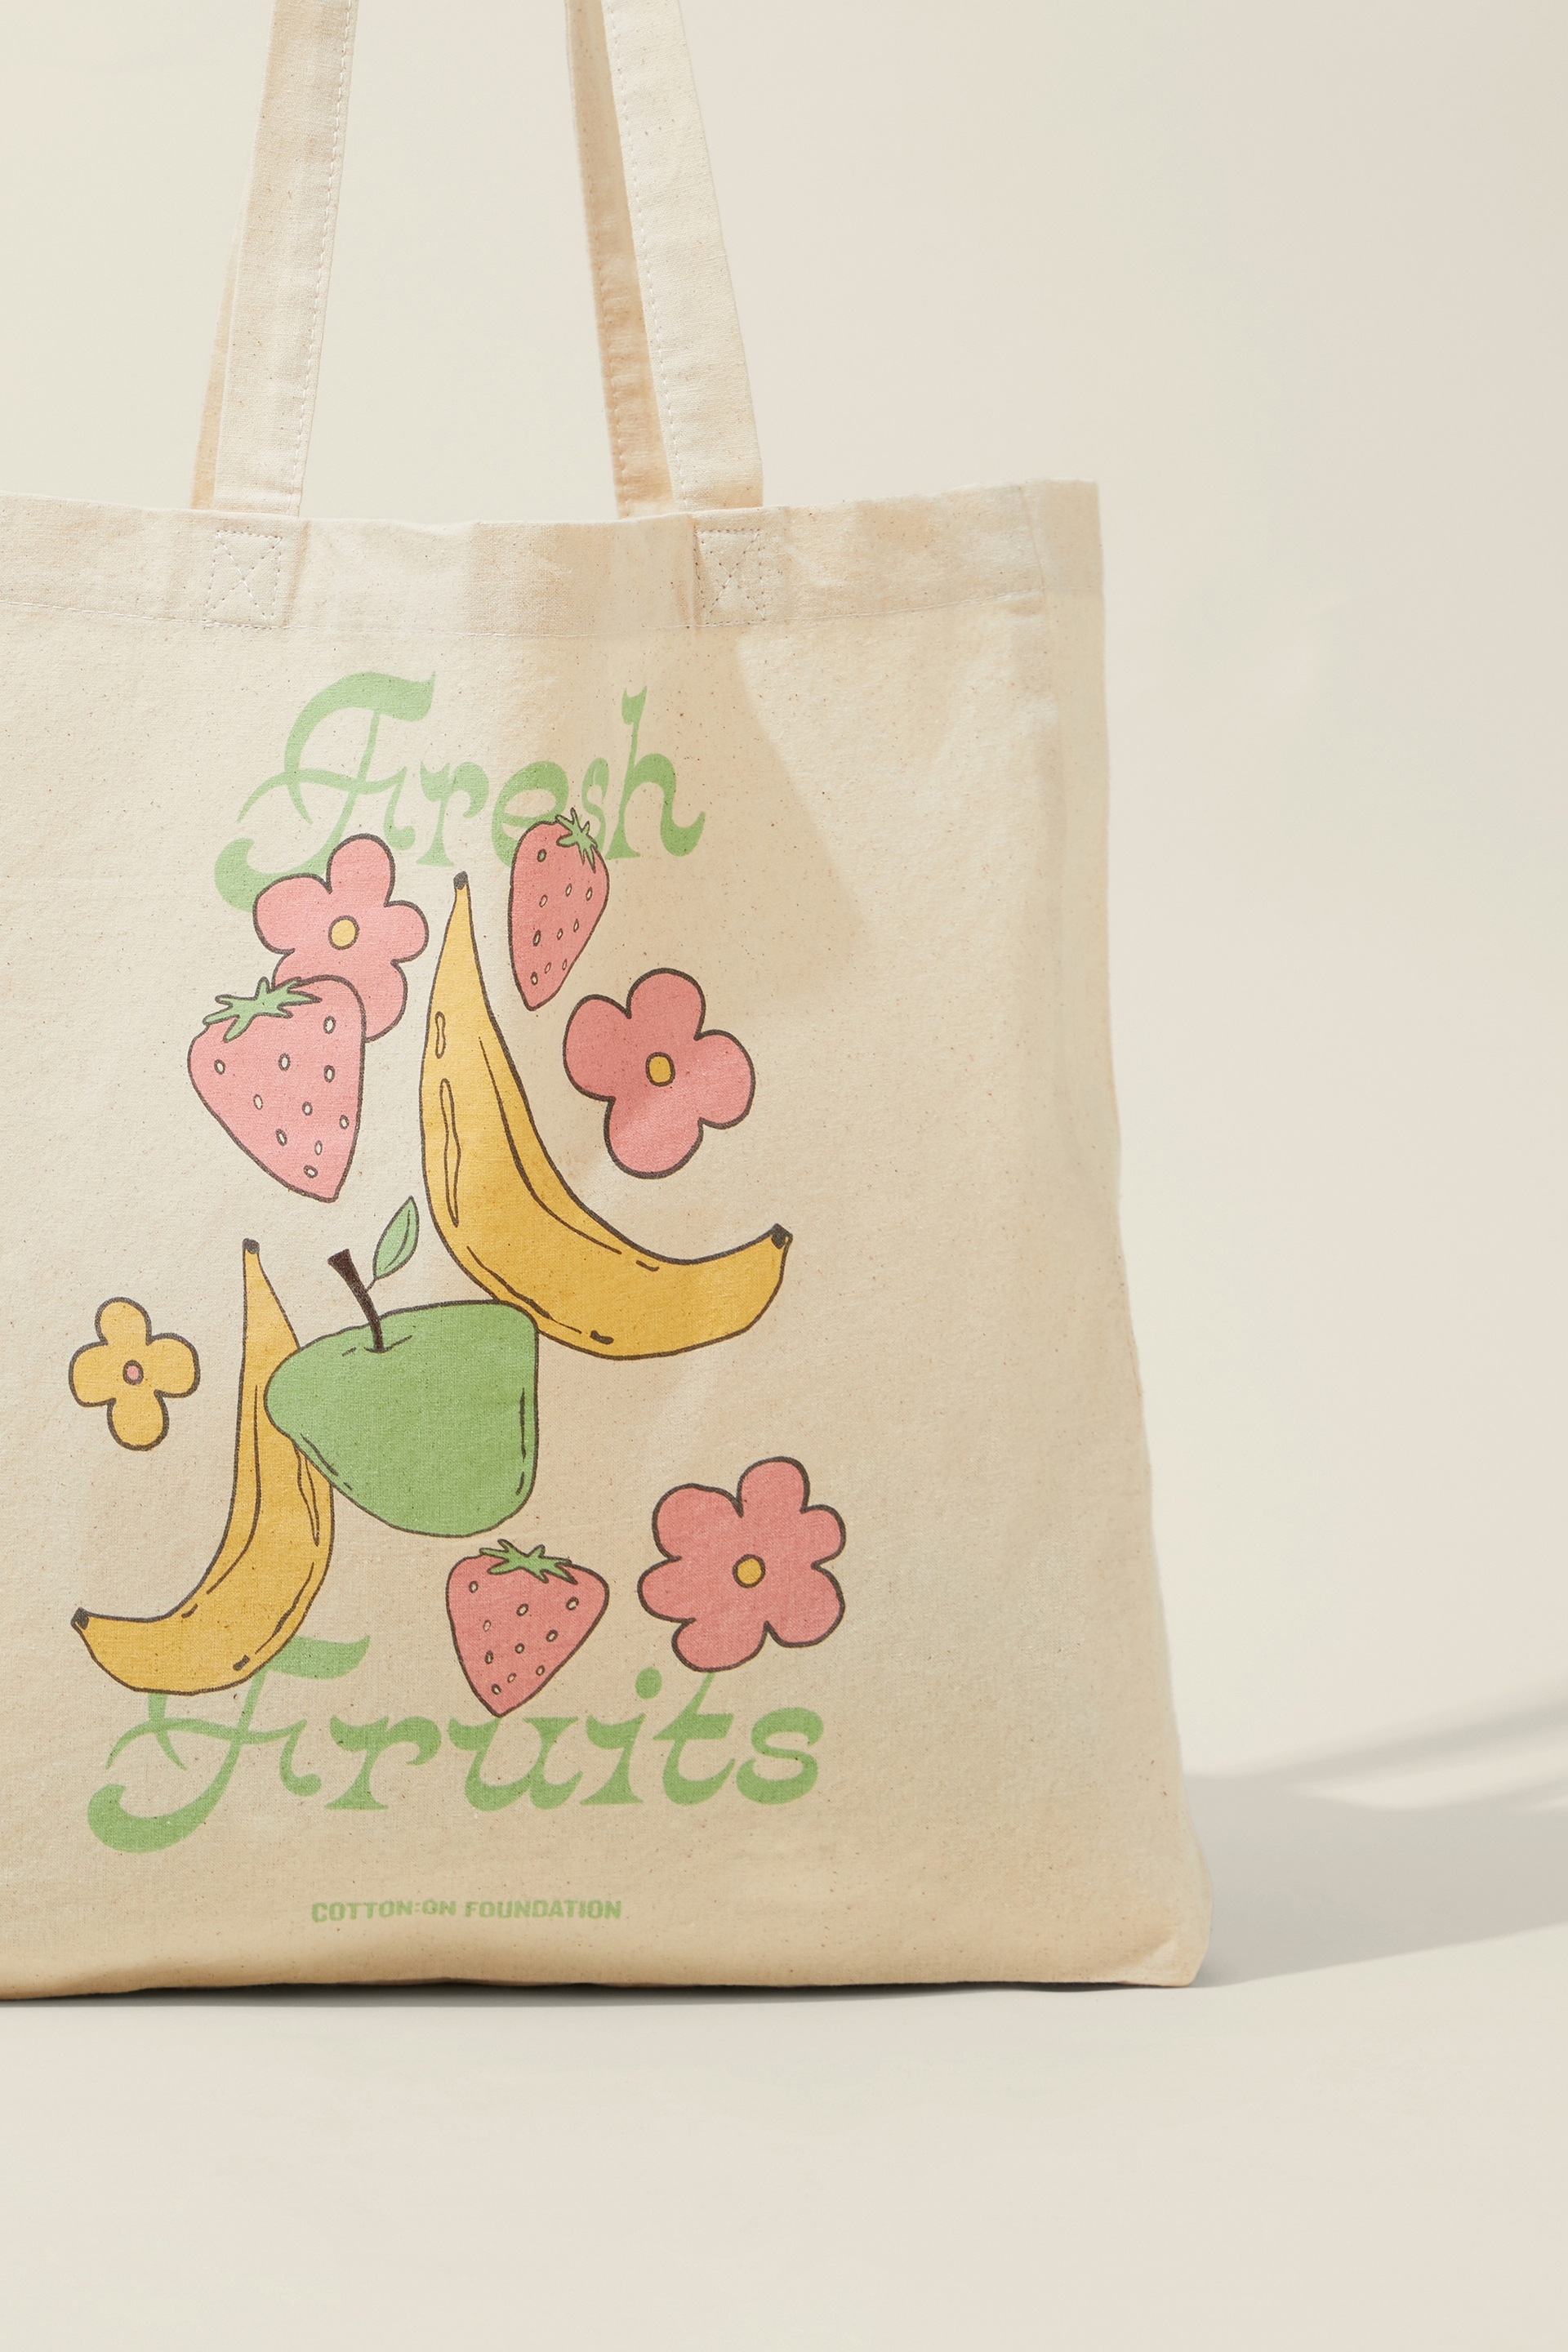 Foundation Body Recycled Tote Bag